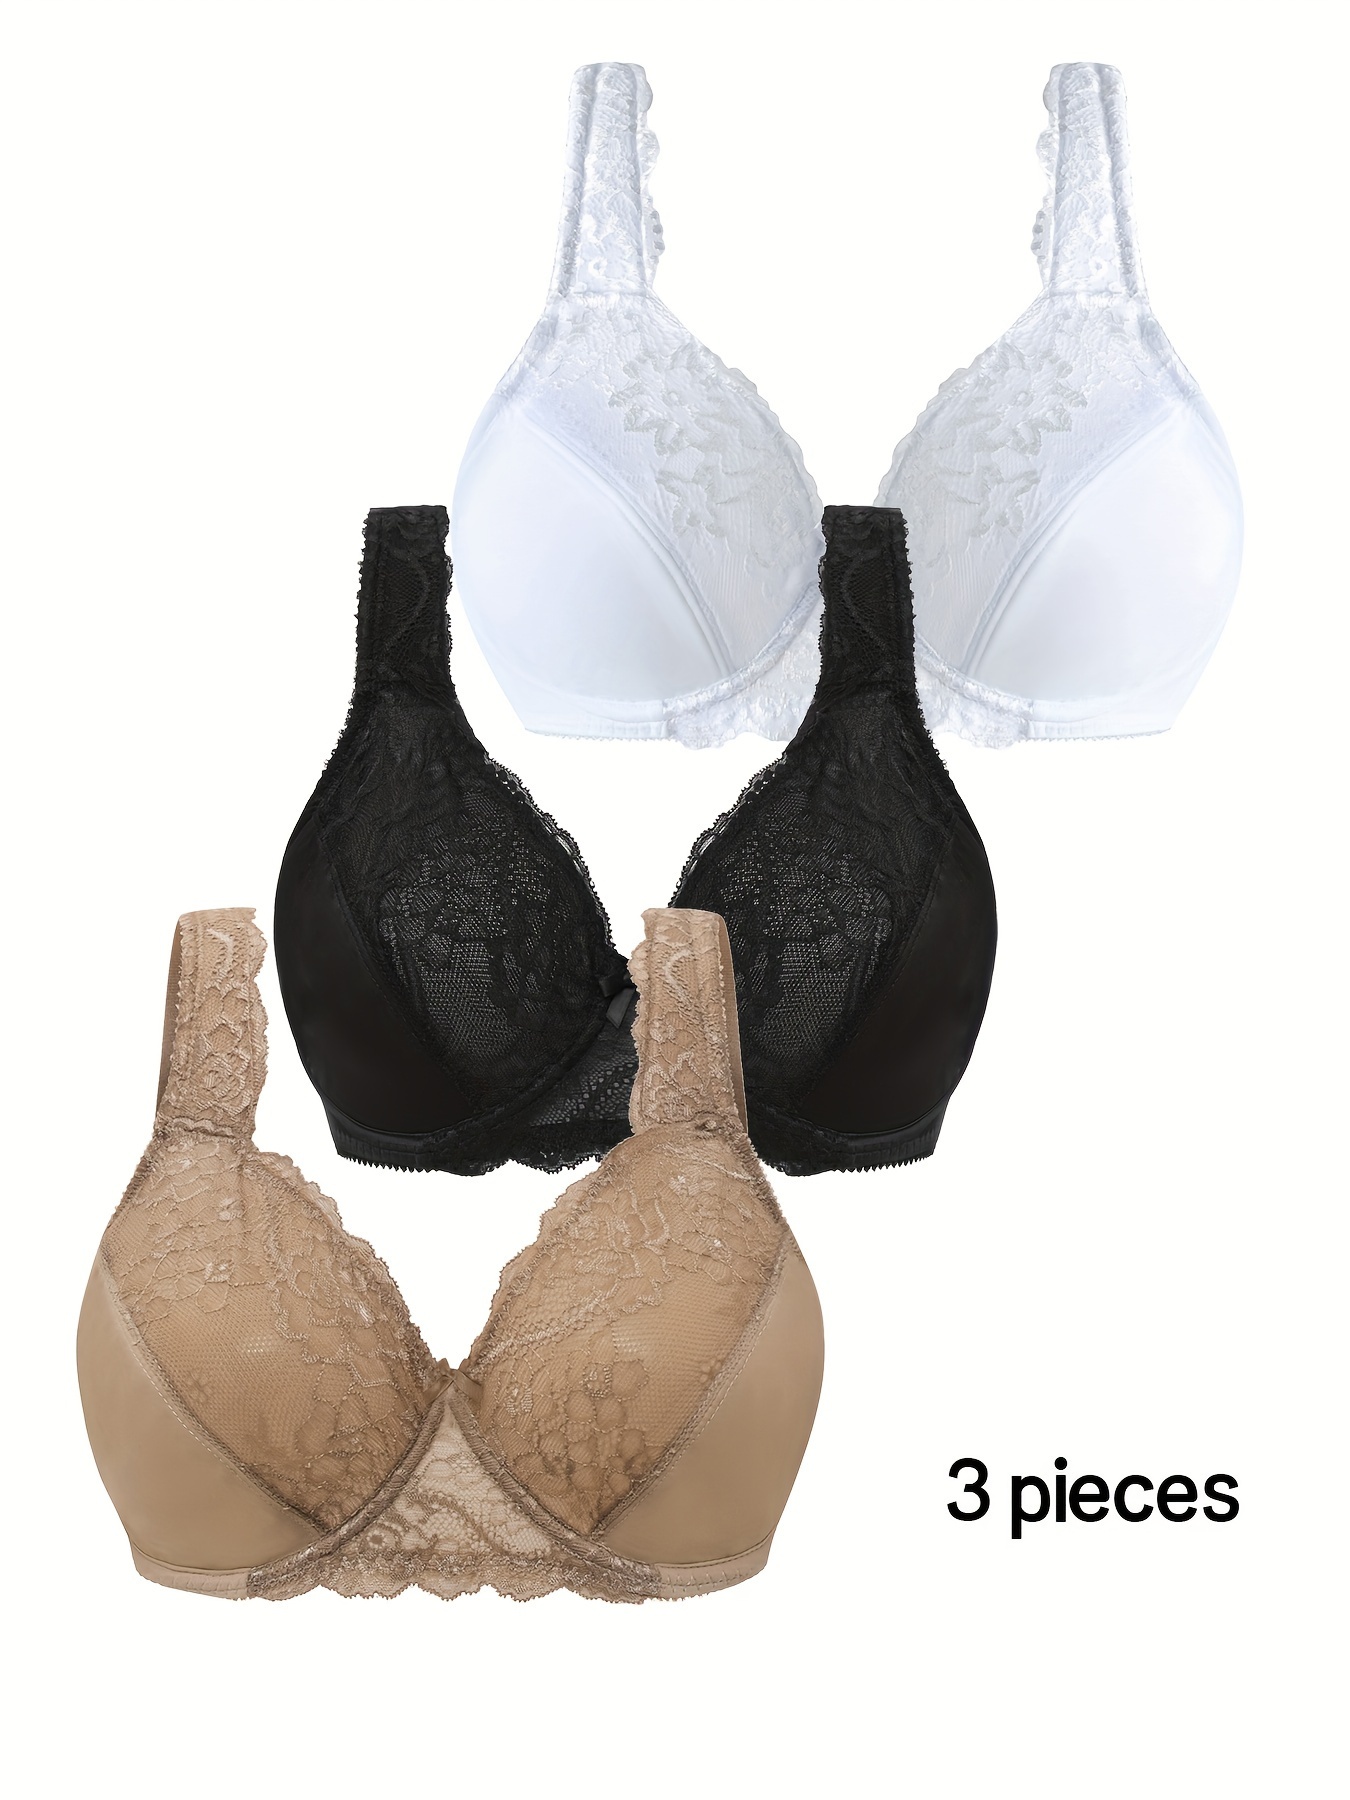 YOURS 2 PACK Black & White Lace Non-Padded Underwired Bras